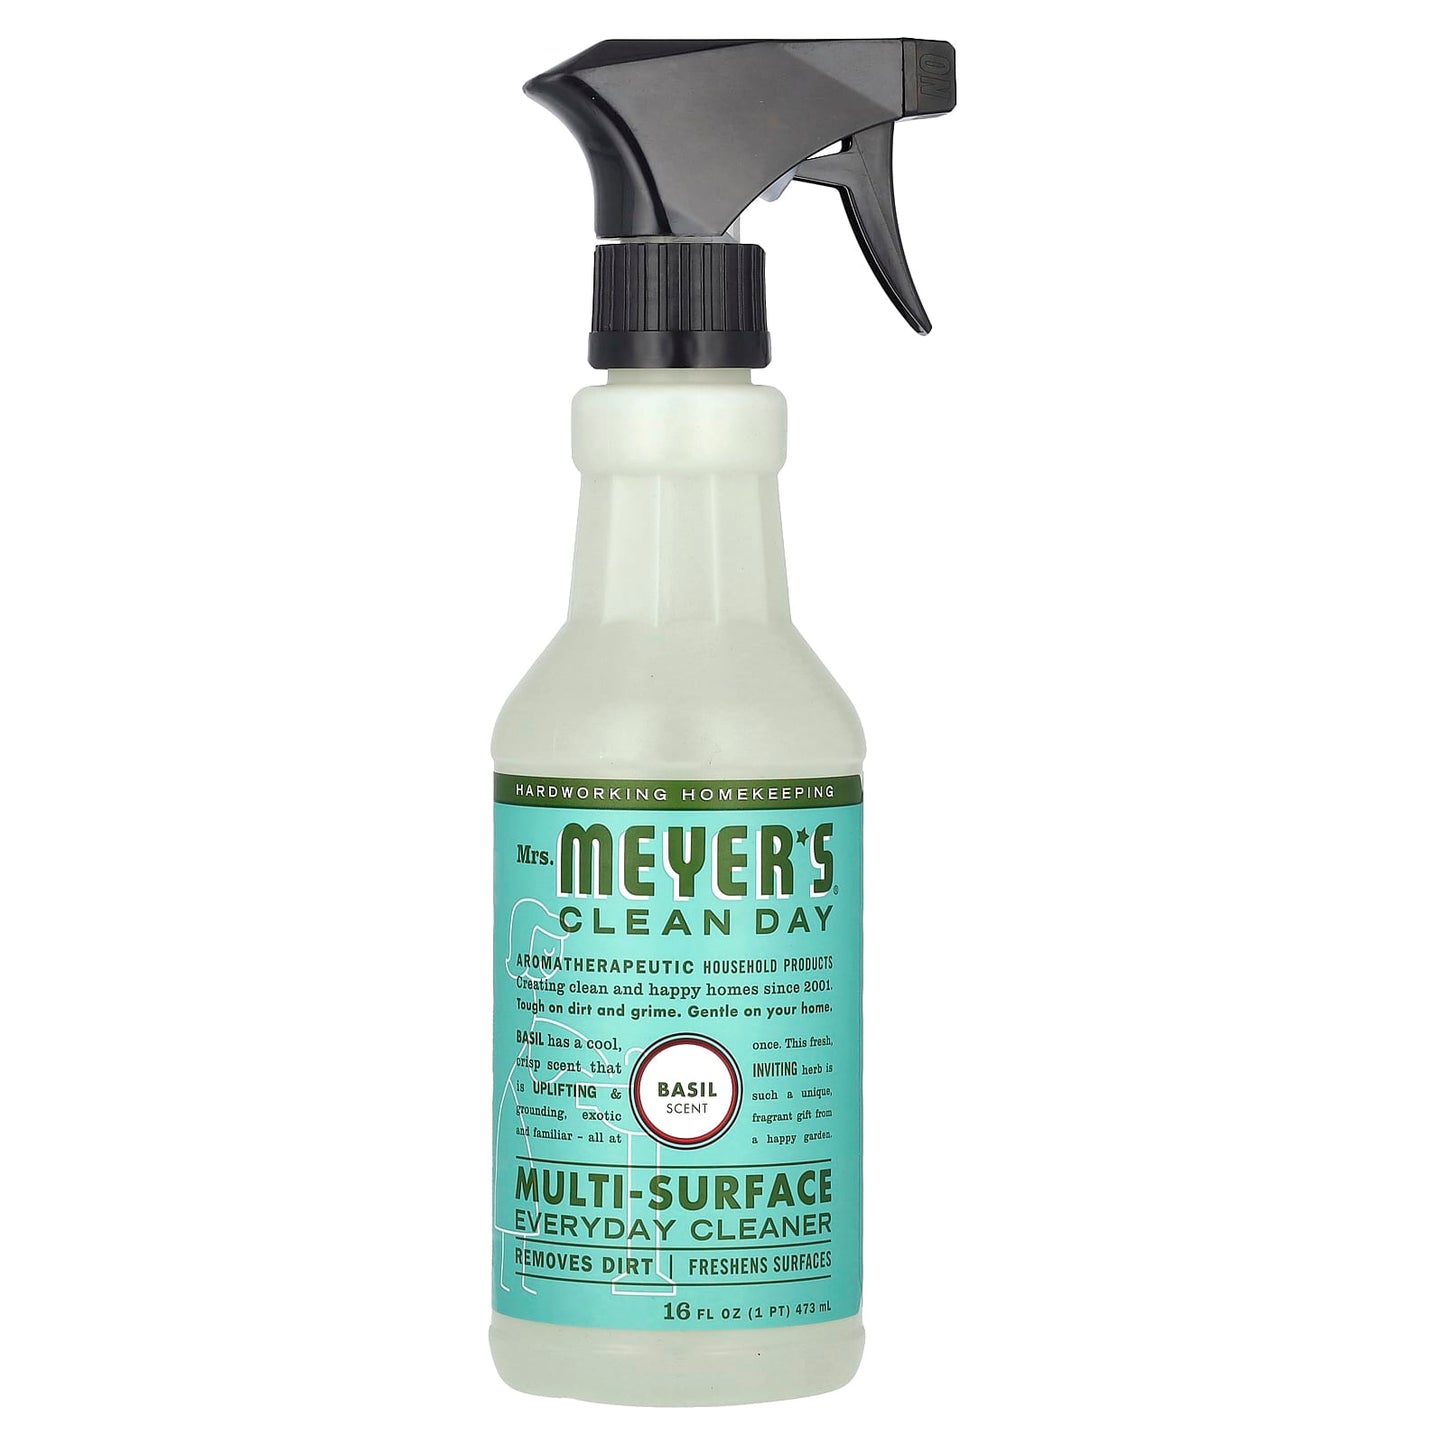 Mrs. Meyers Clean Day-Multi-Surface Everyday Cleaner-Basil Scent-16 fl oz (473 ml)